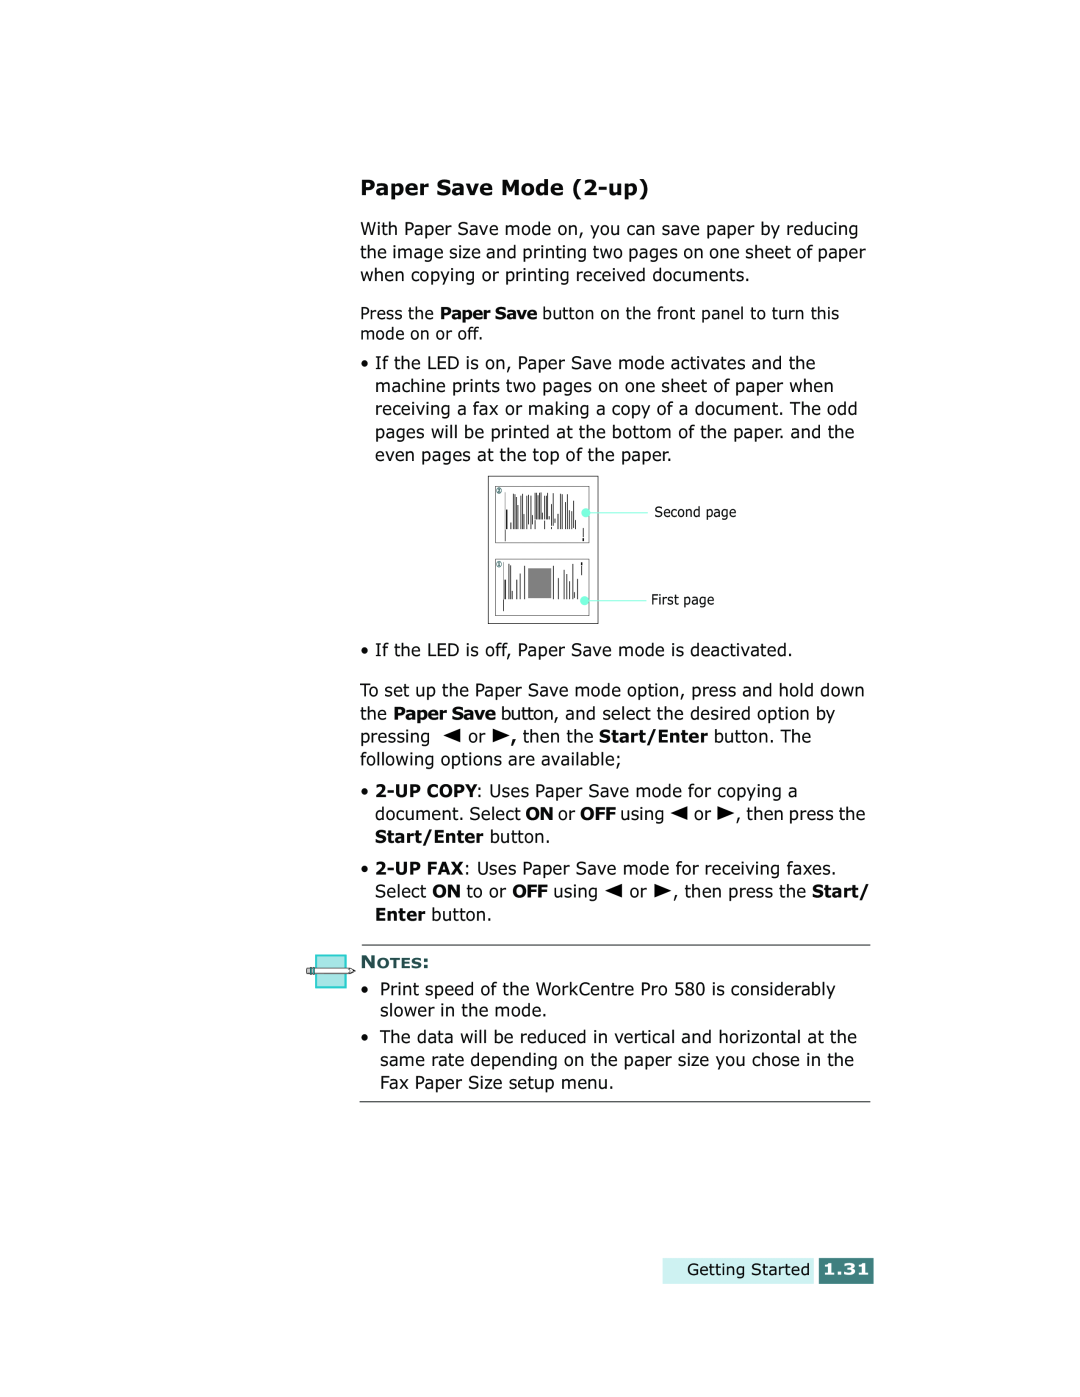 Xerox Pro 580 manual Paper Save Mode 2-up 